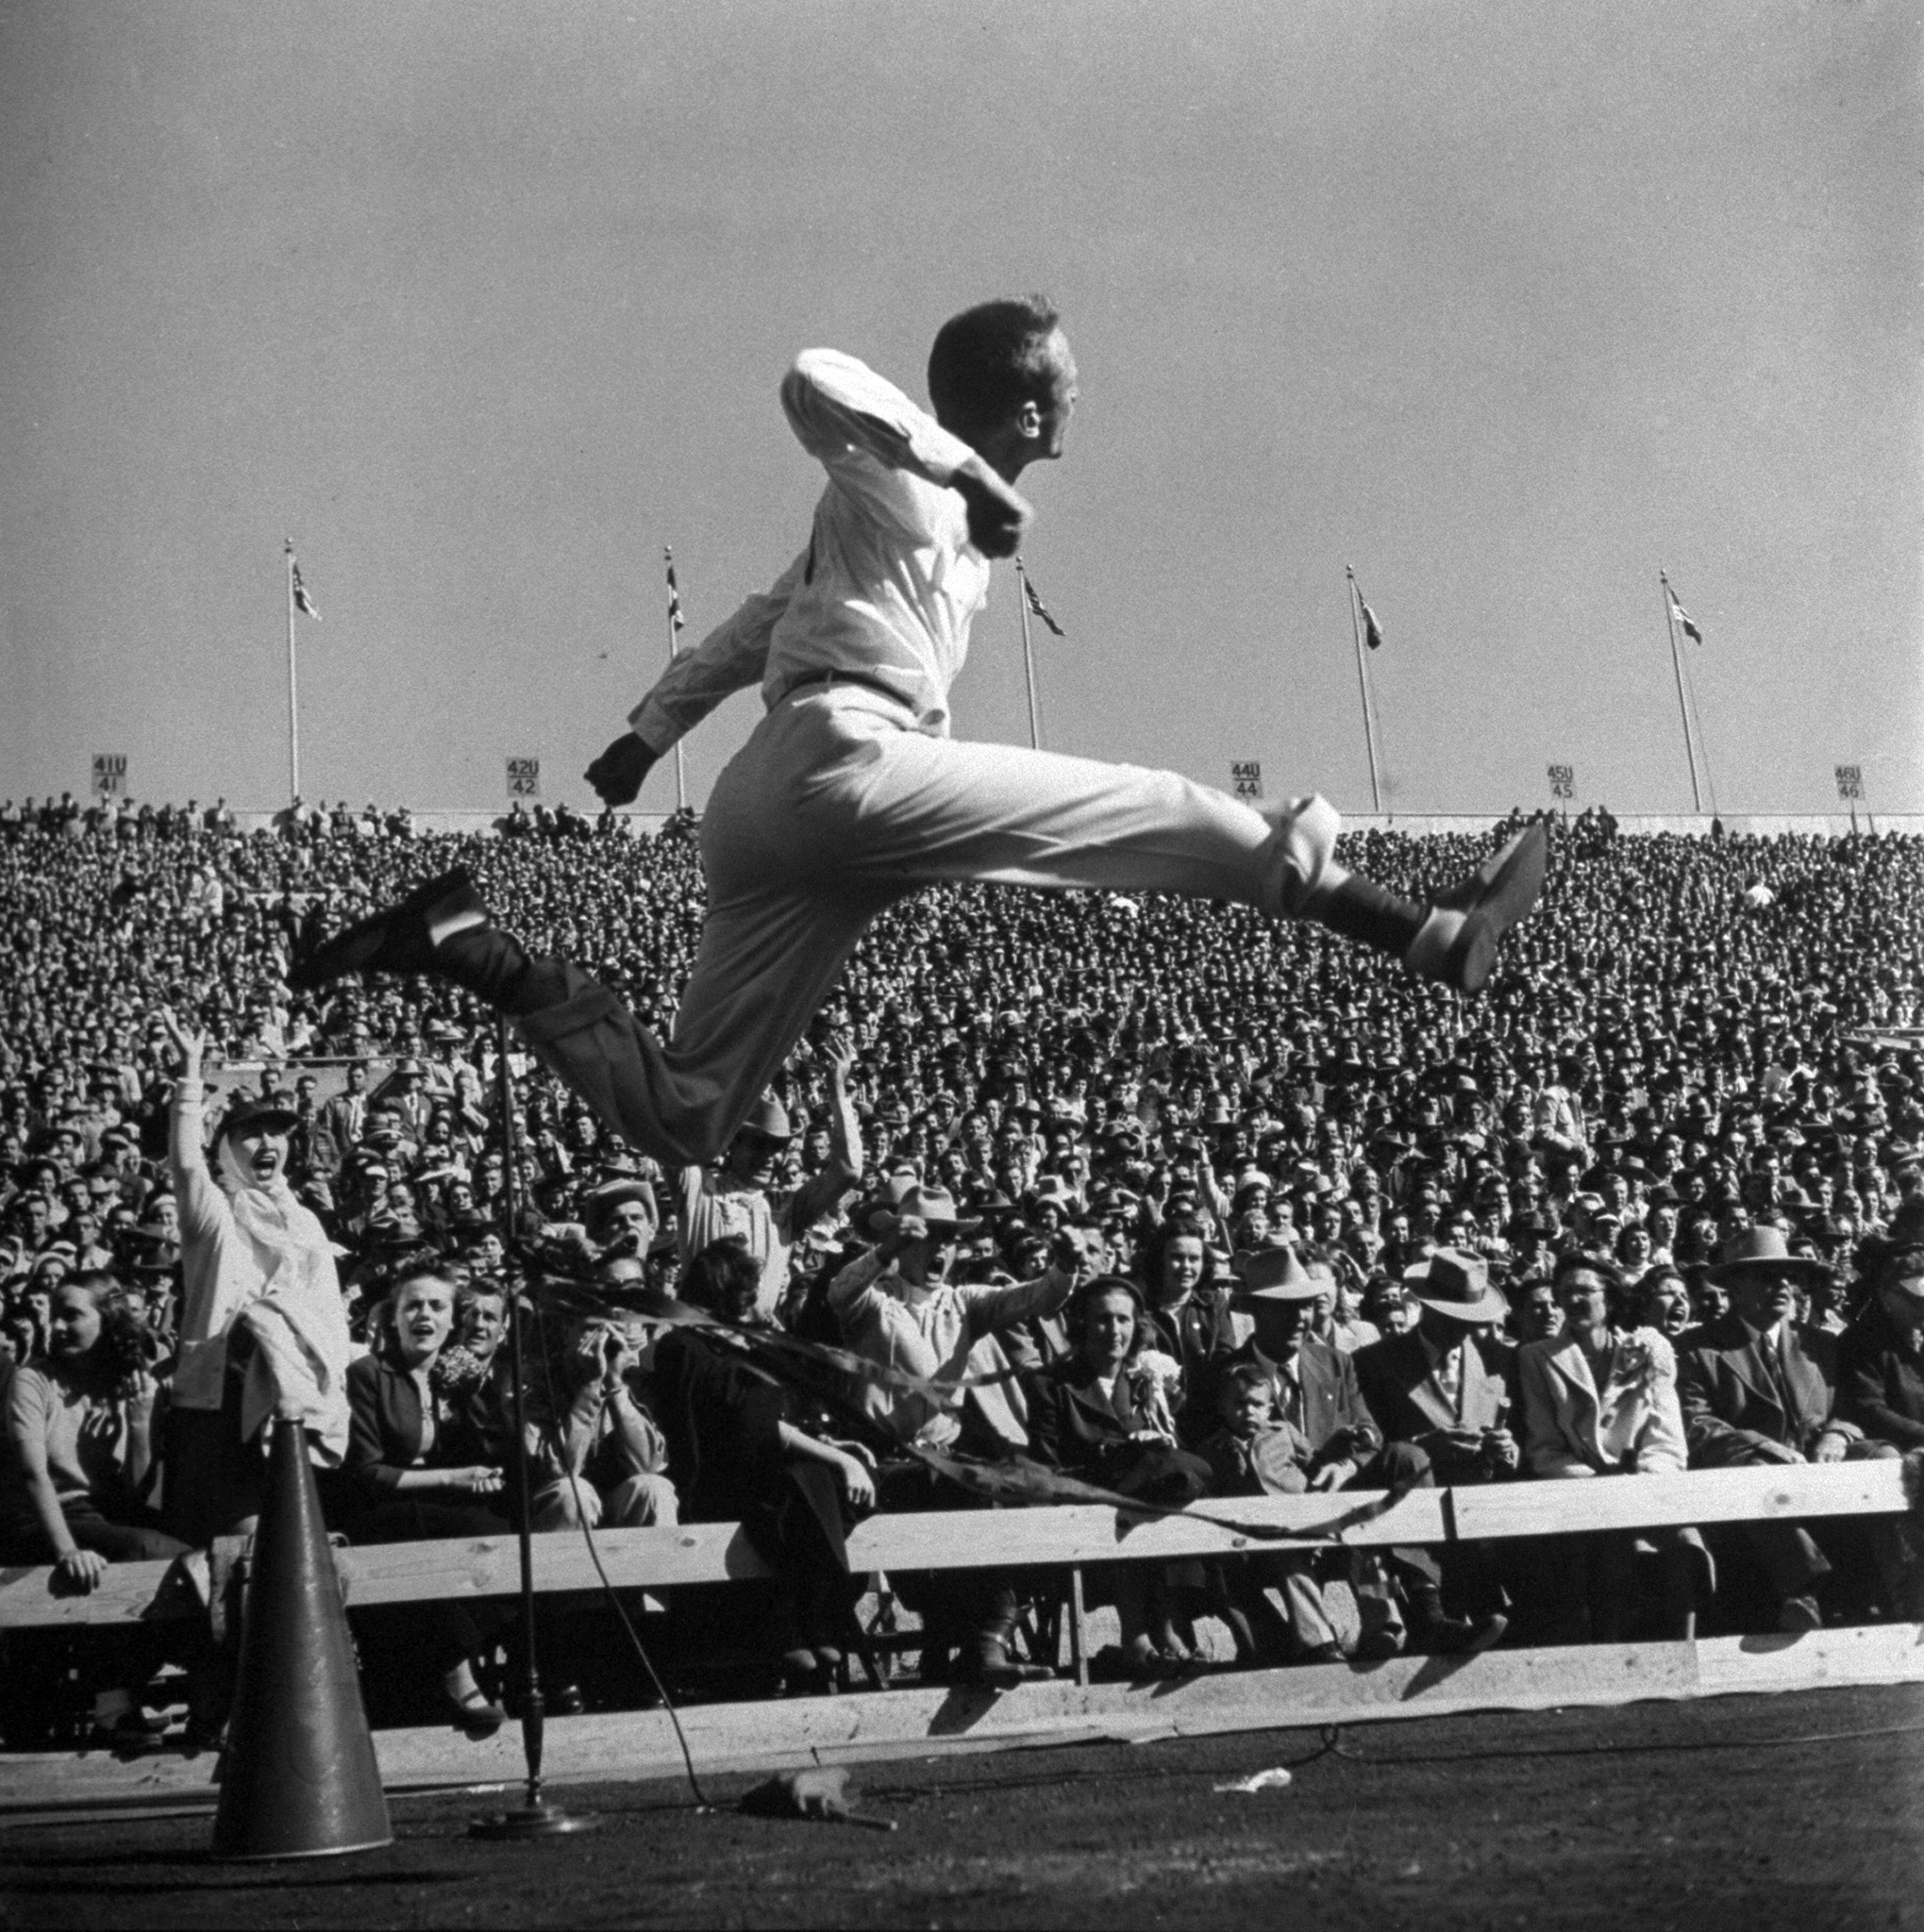 SMU cheerleader leaping high into air at University of Texas football game, 1950.